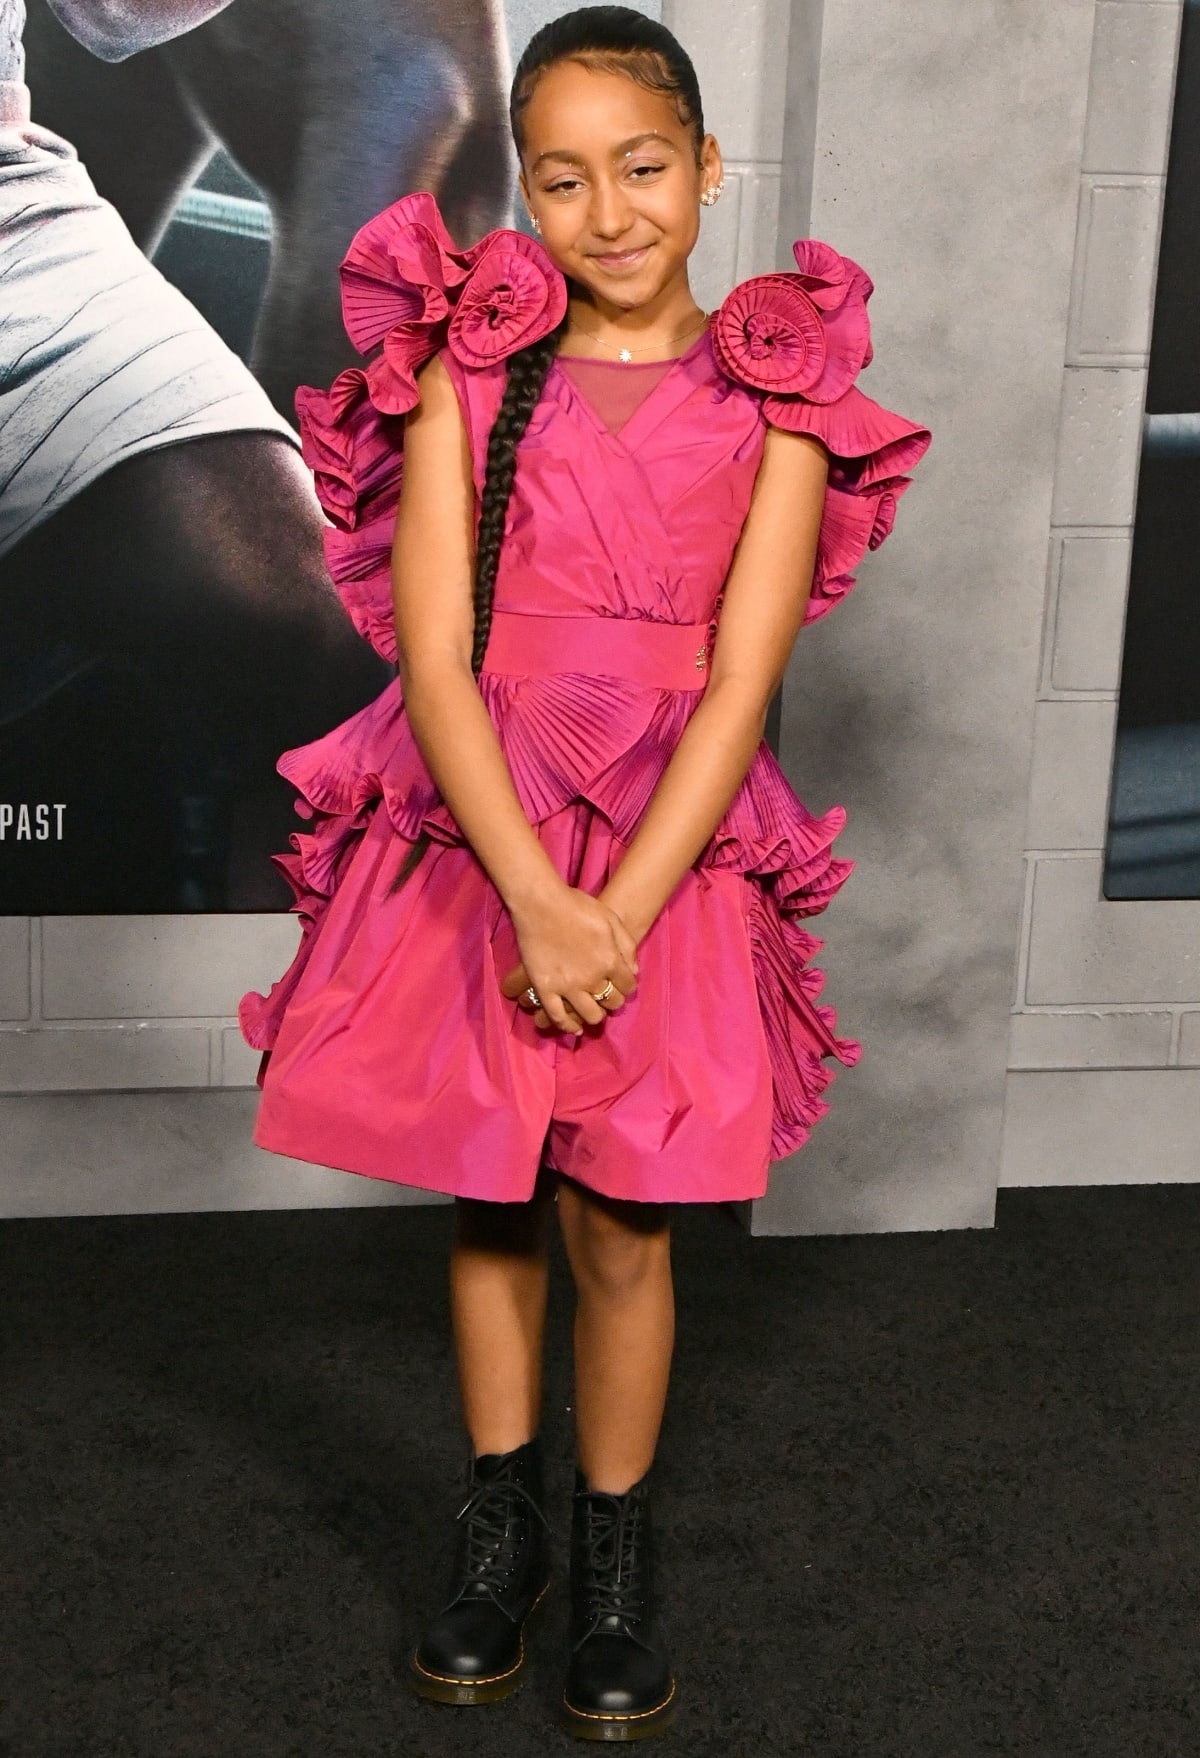 Mila Davis-Kent looking adorable in a pretty pink dress with black combat boots at the Los Angeles premiere of Creed III